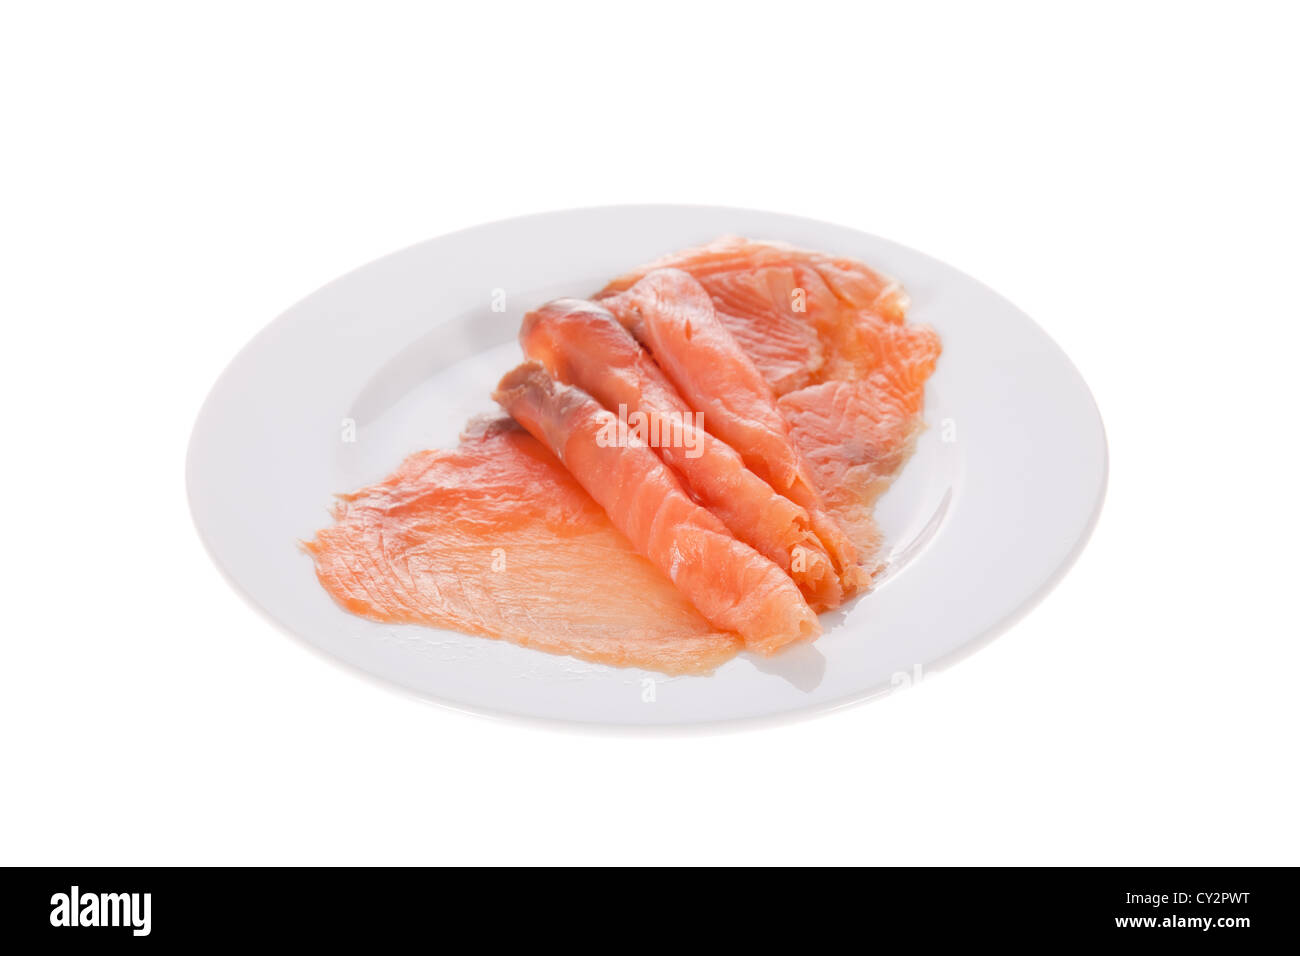 Smoked salmon slices in a dish isolated on white background Stock Photo